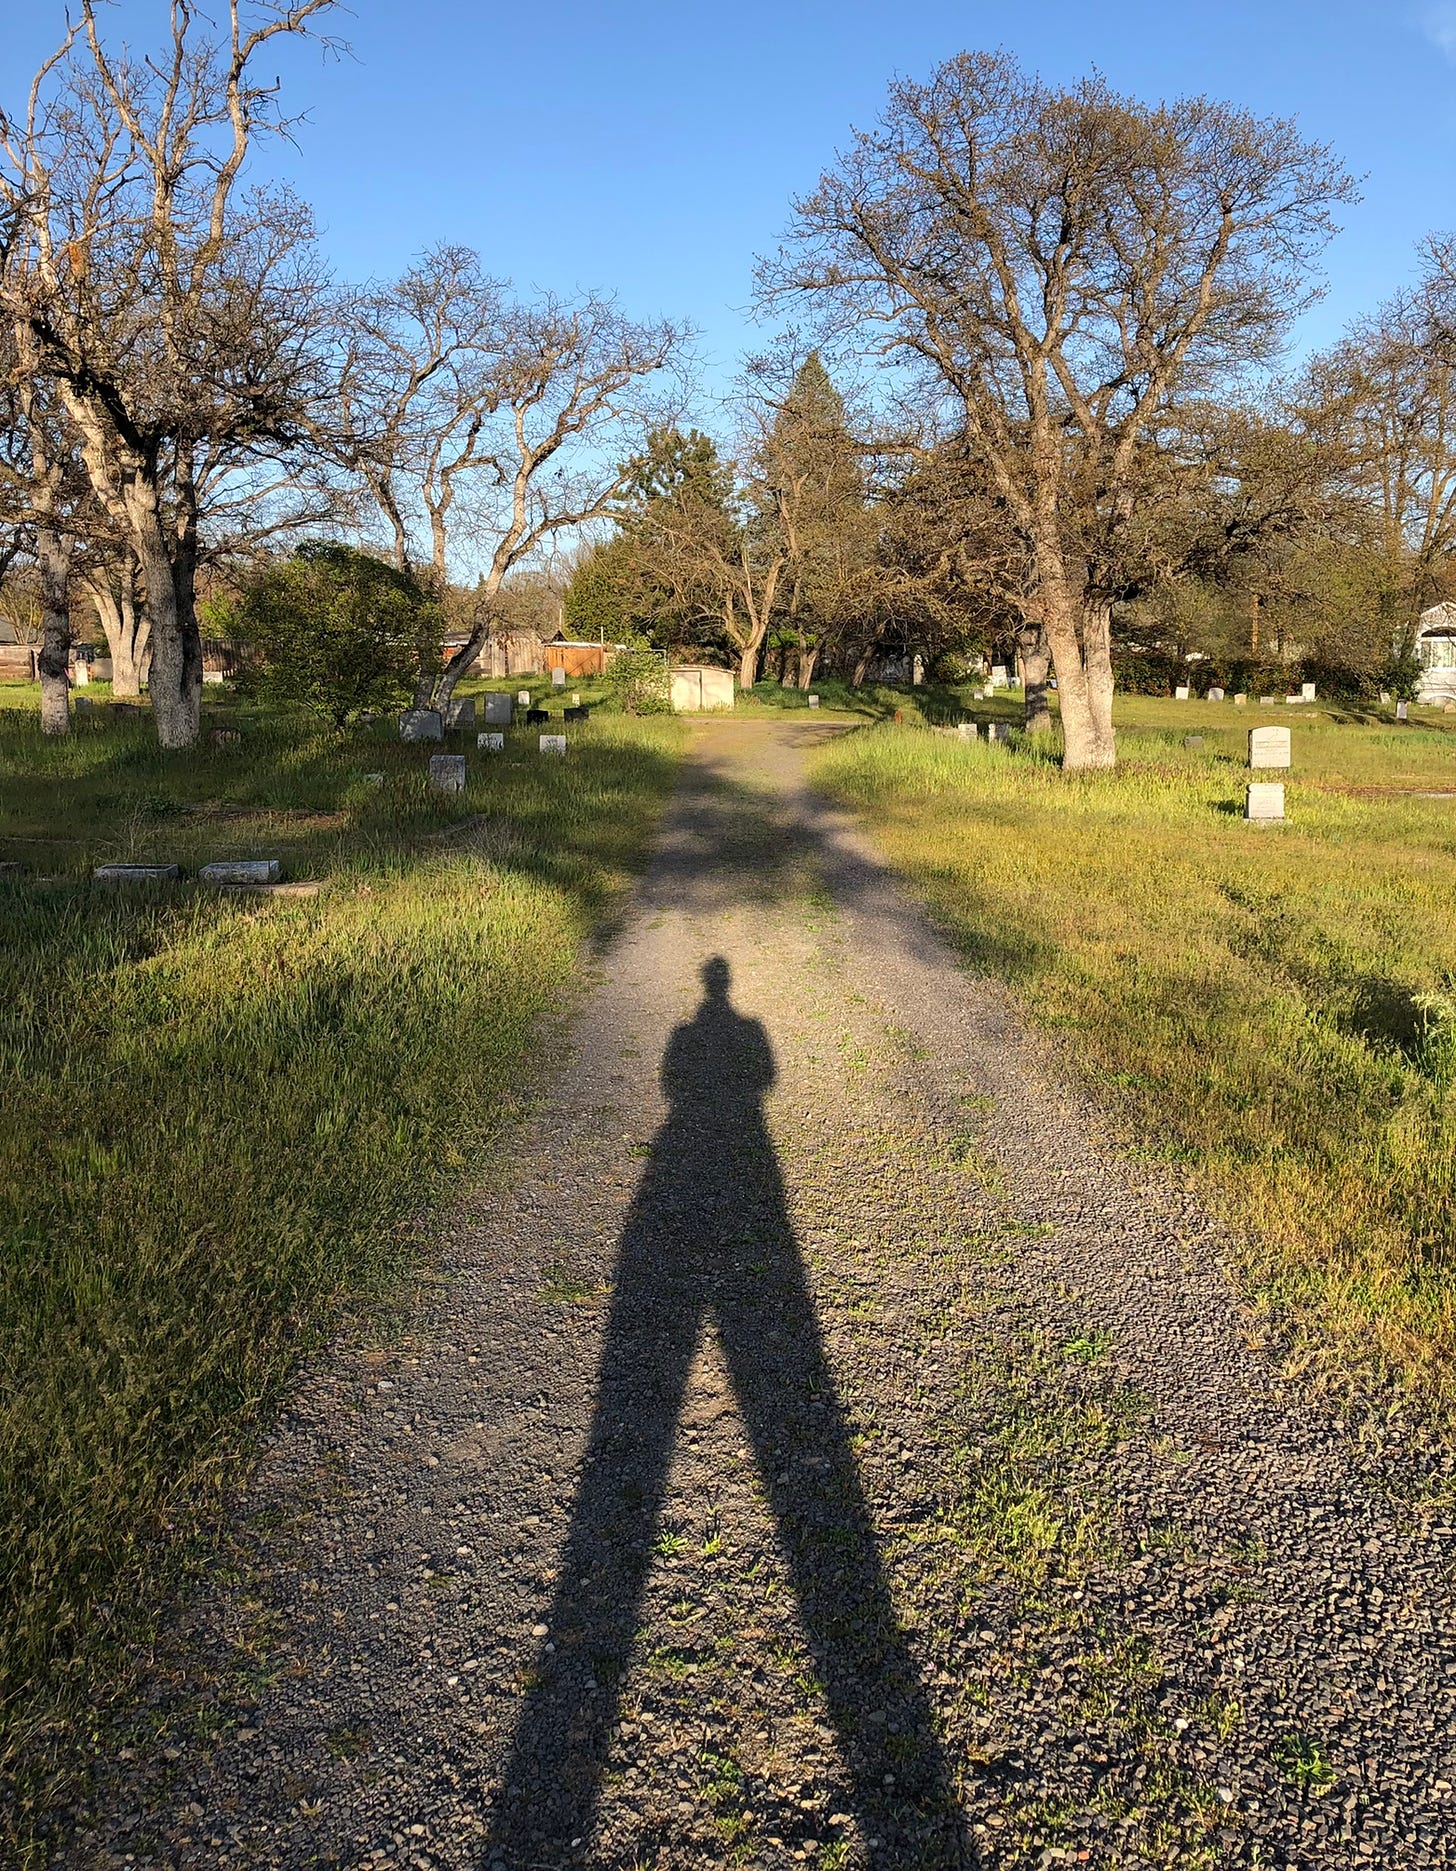 a dirt road through a grassy cemetery, on which there is an elongated shadow of a person